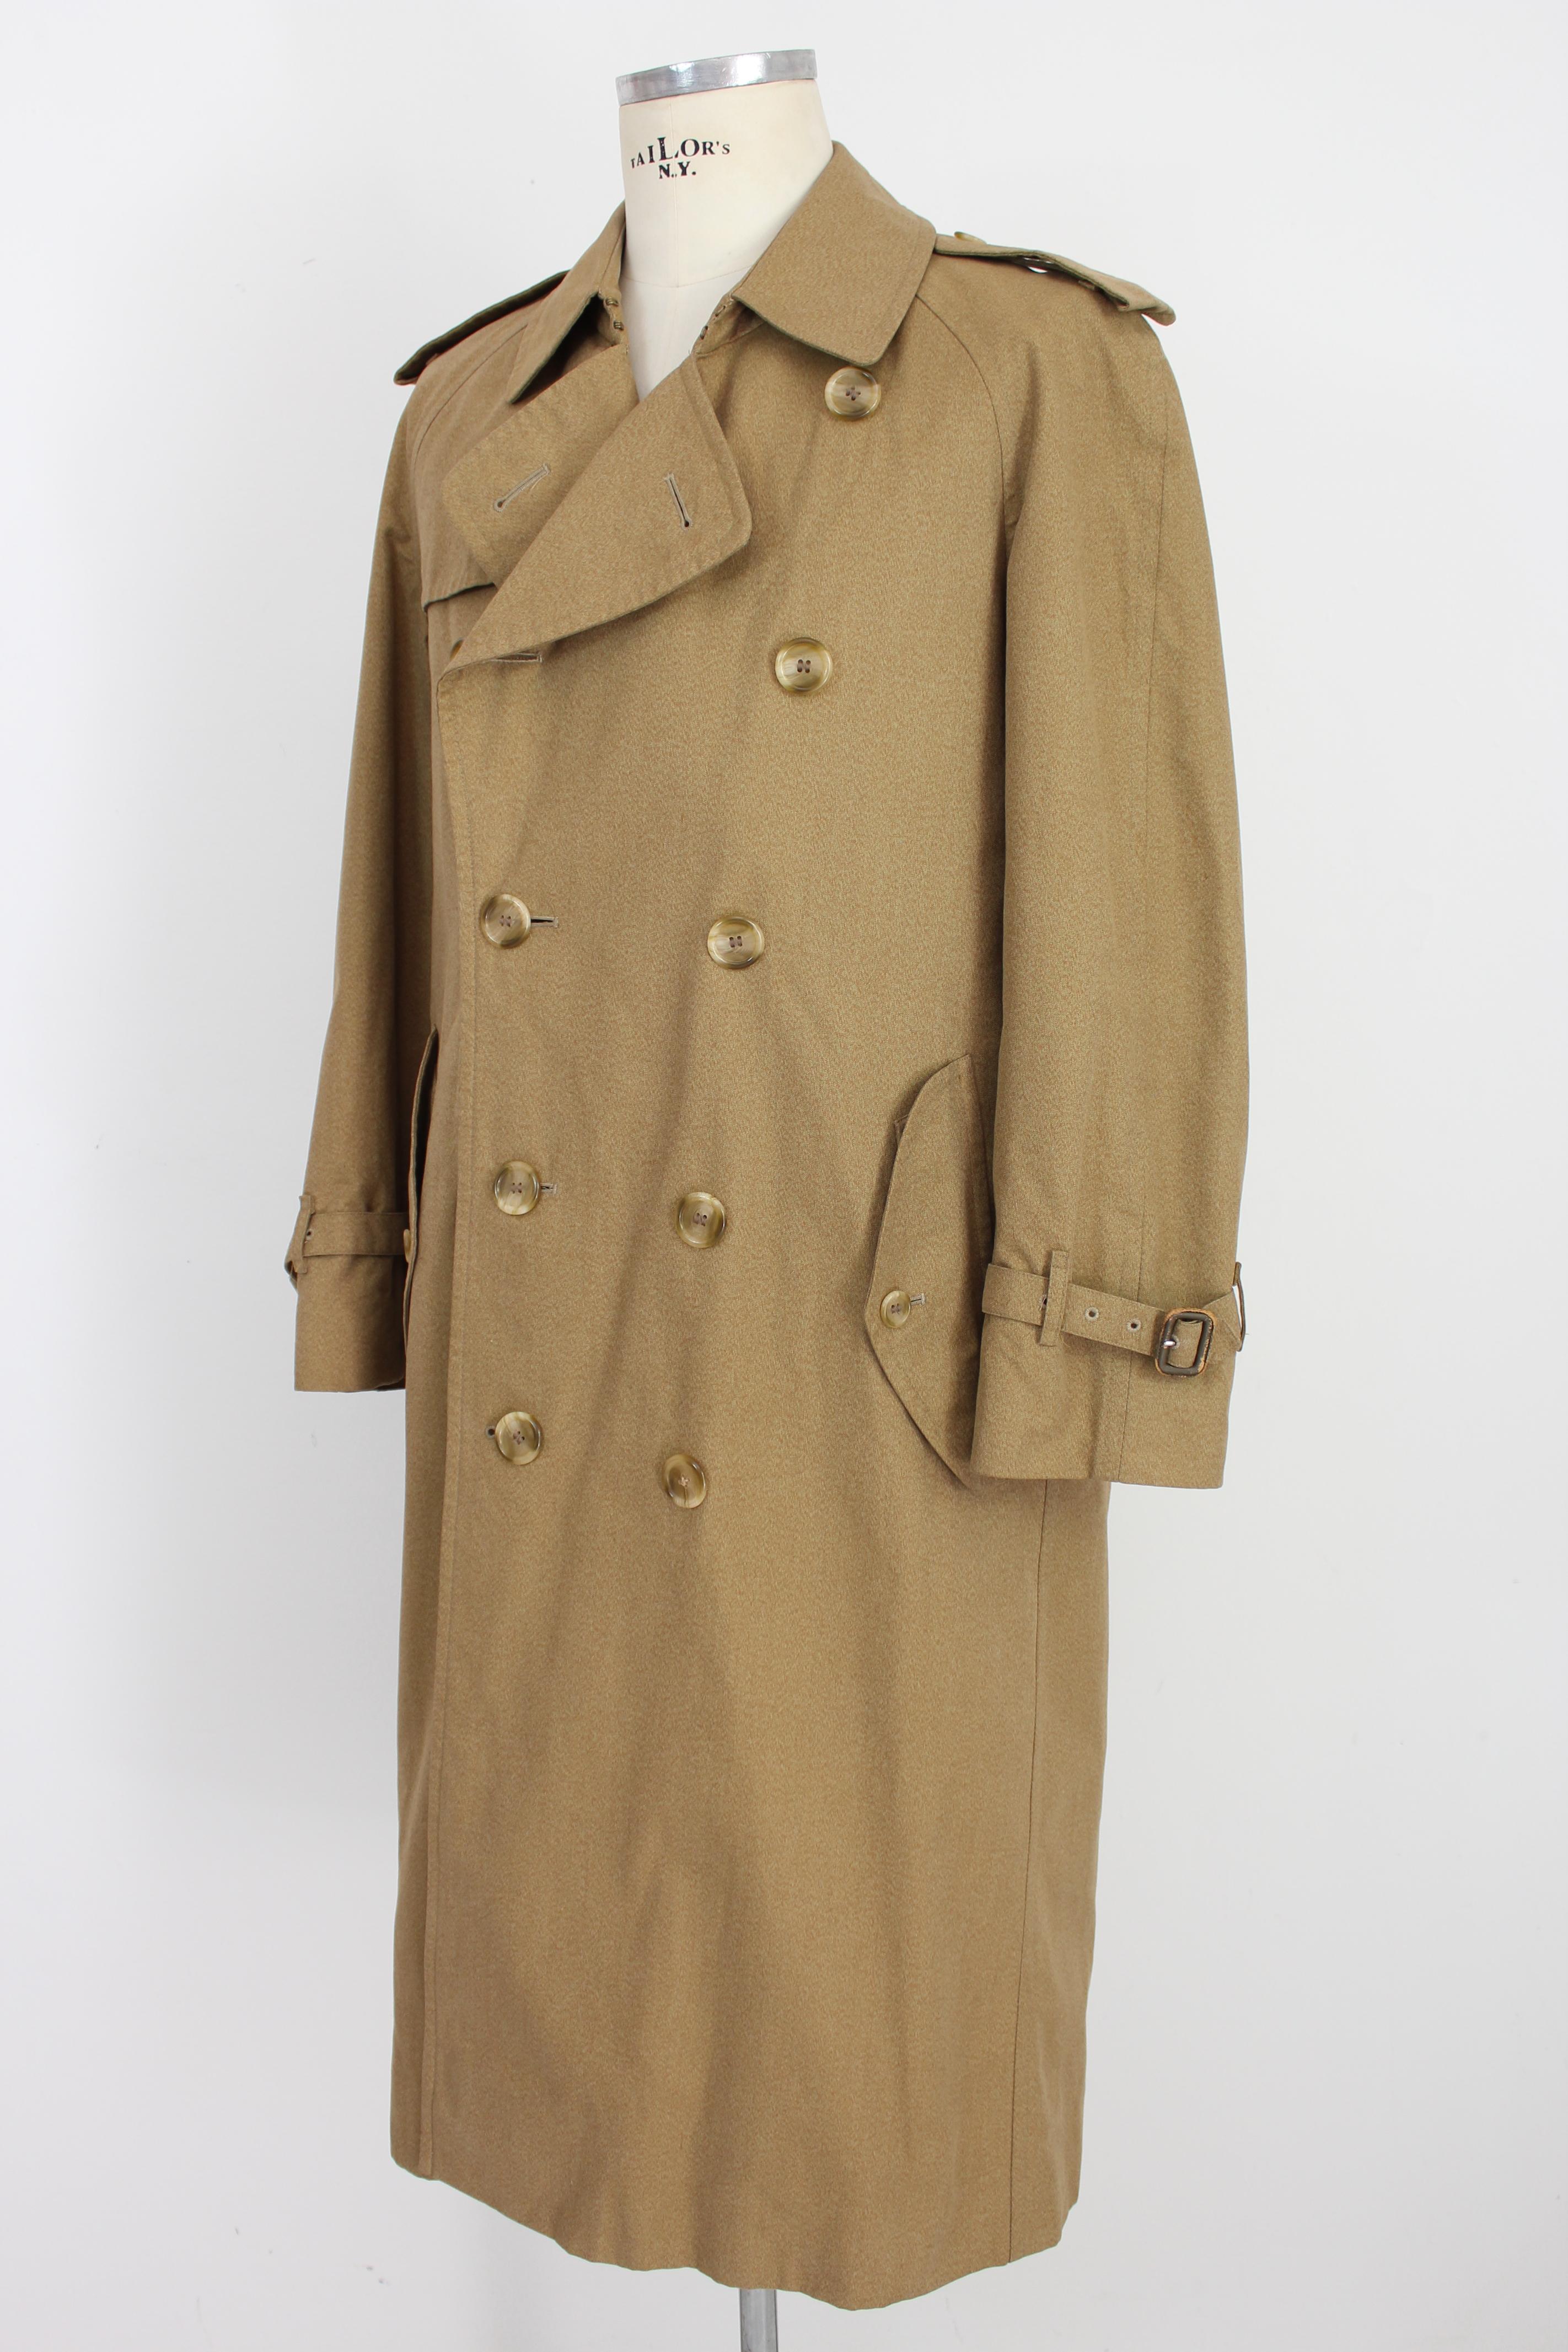 Men's Burberry Beige Cotton Double Breasted Trench Coat 1980s